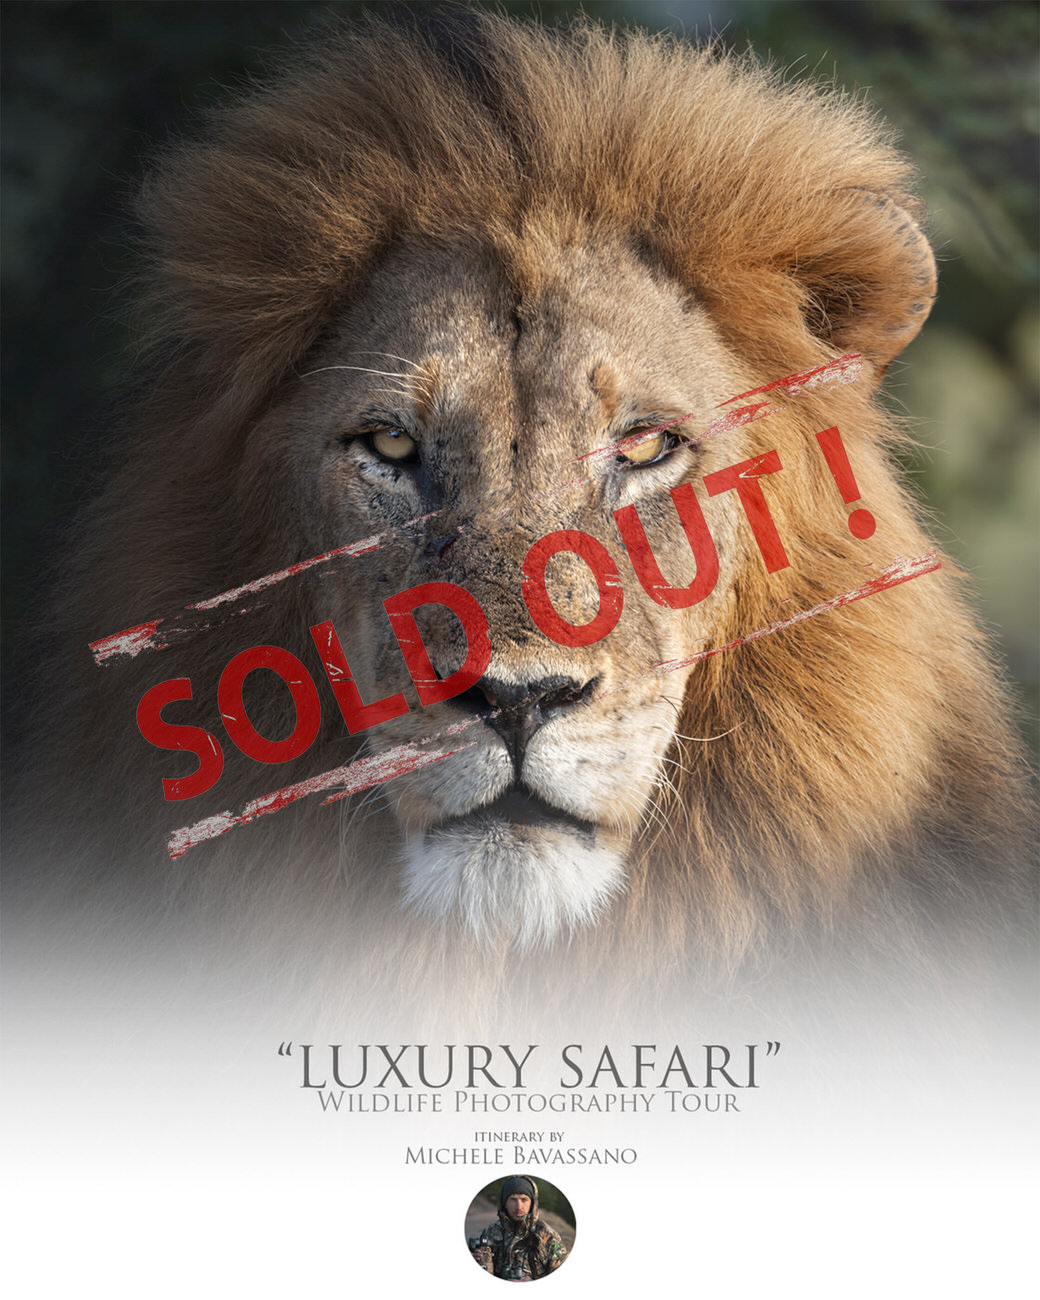 luxury-safari-sold-out-